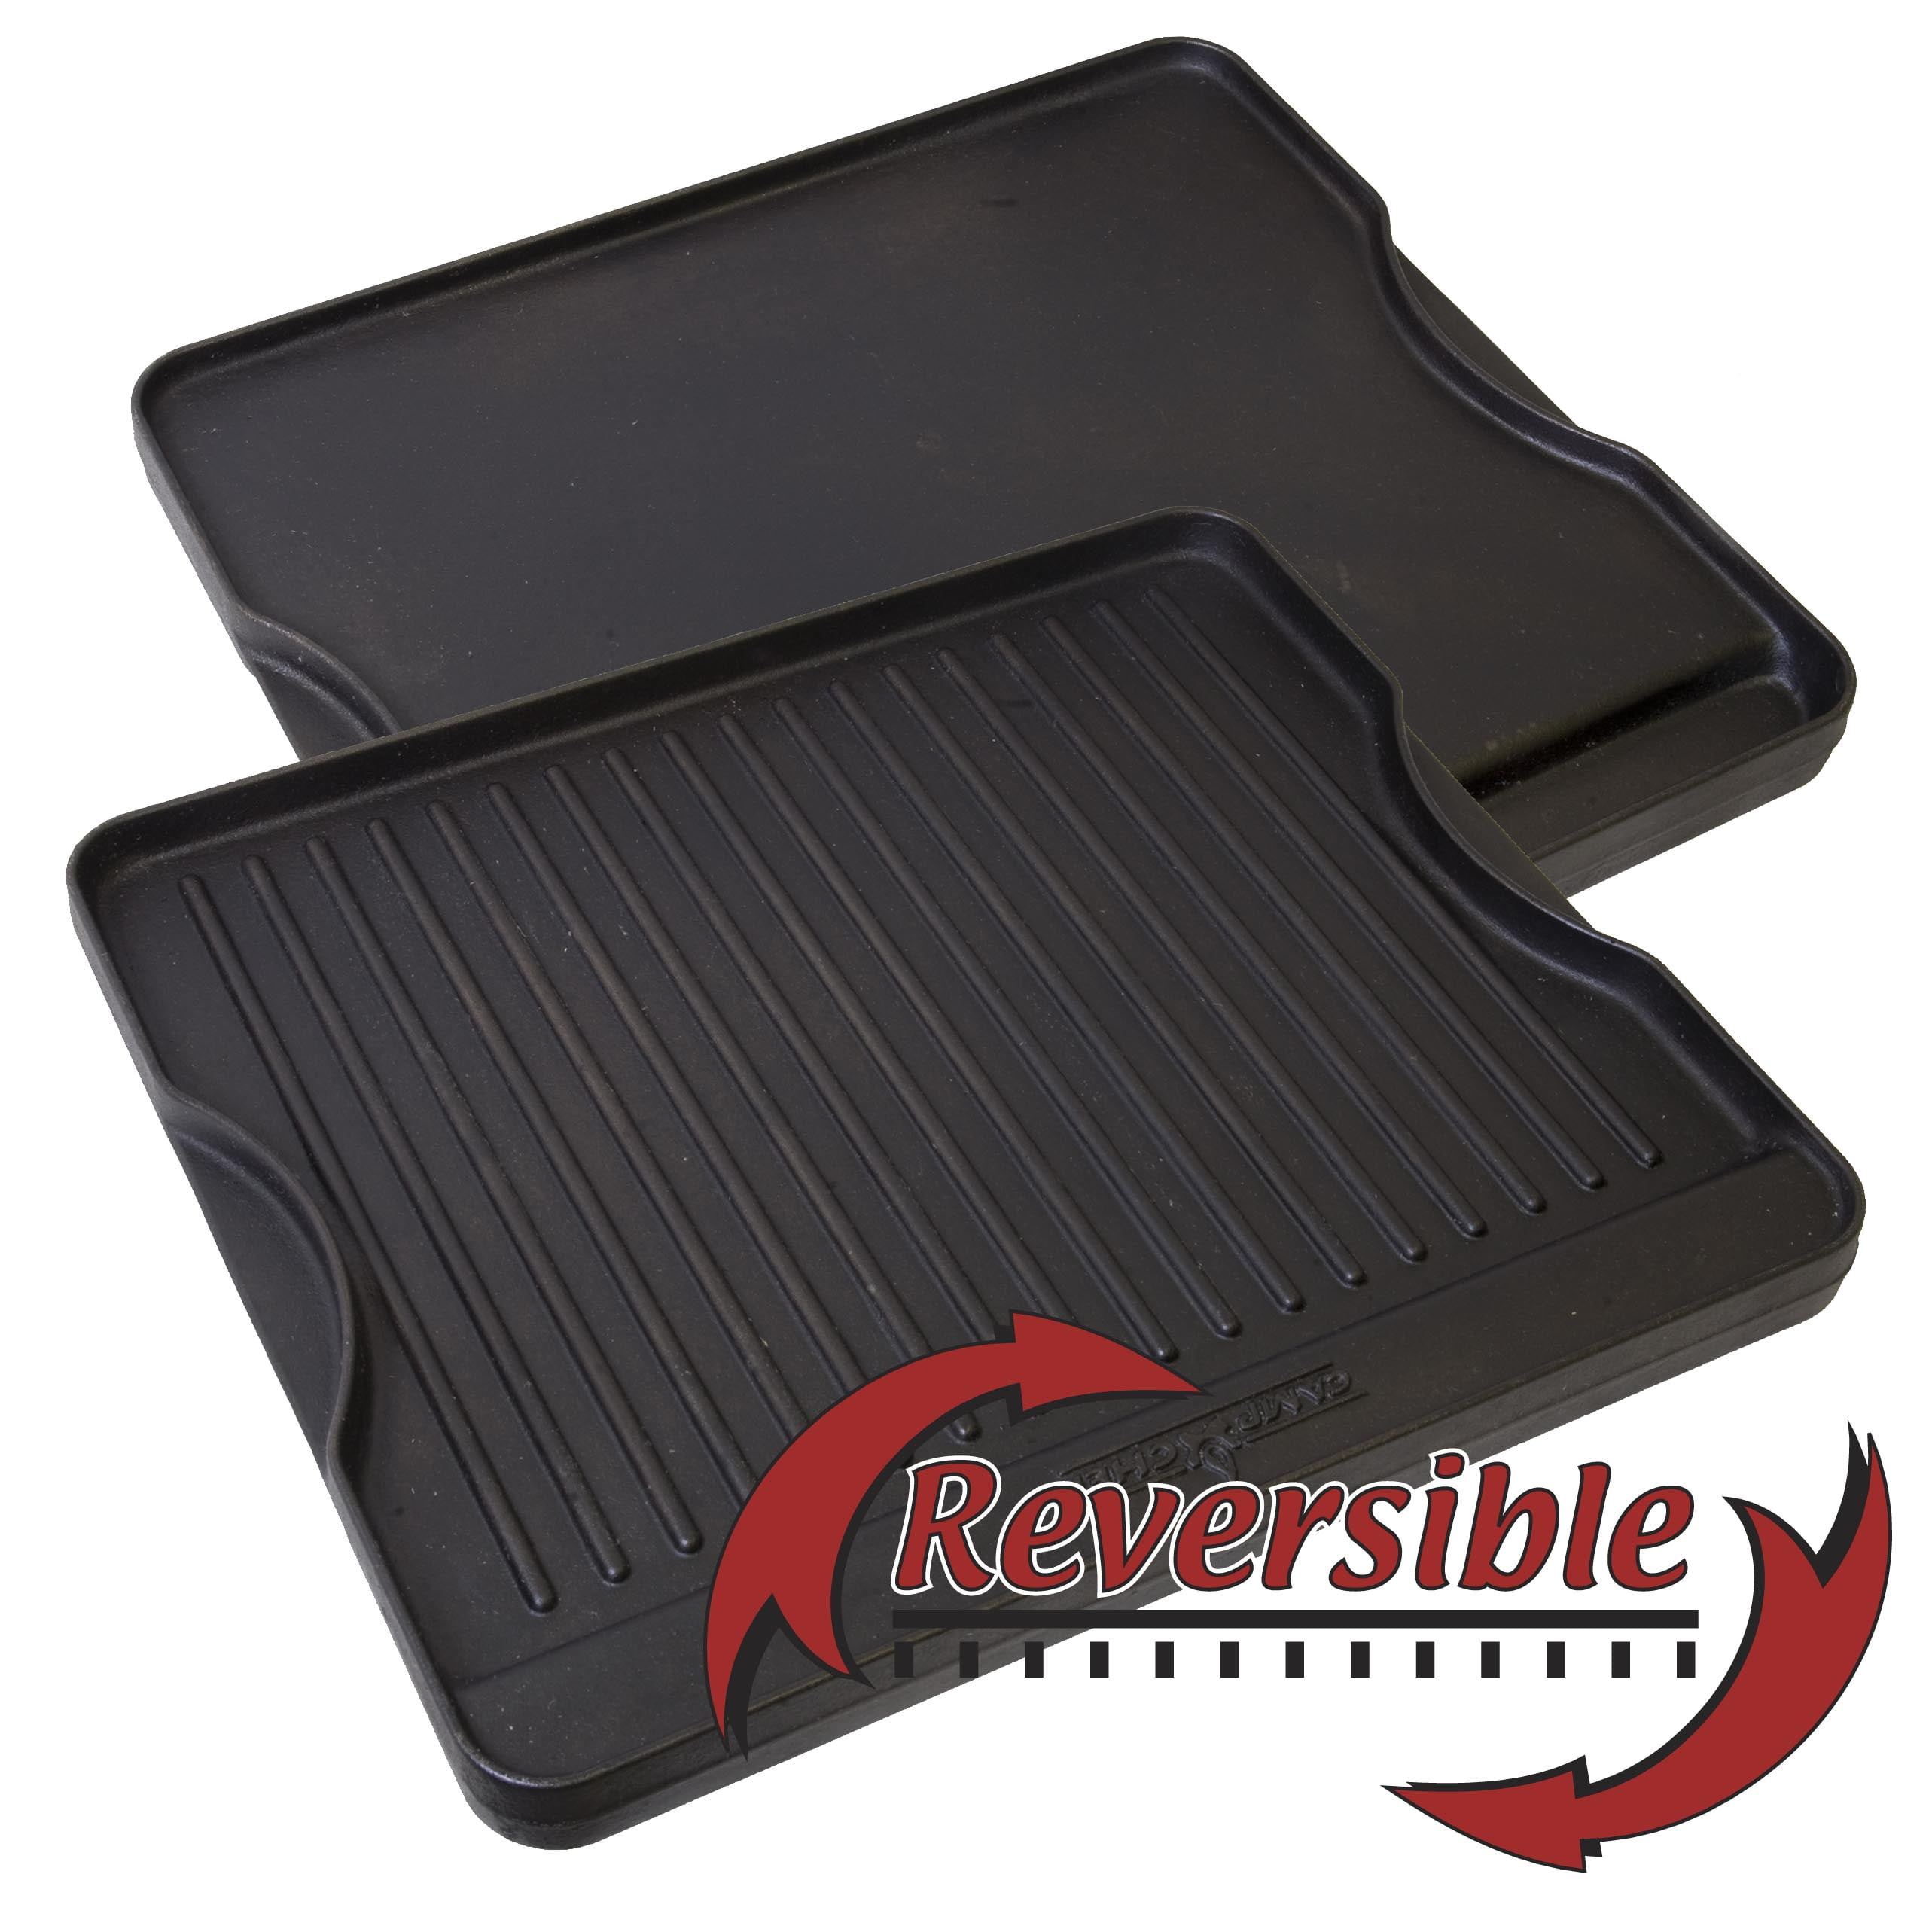  GGC Cast Iron Reversible Grill Griddle for Stove Top